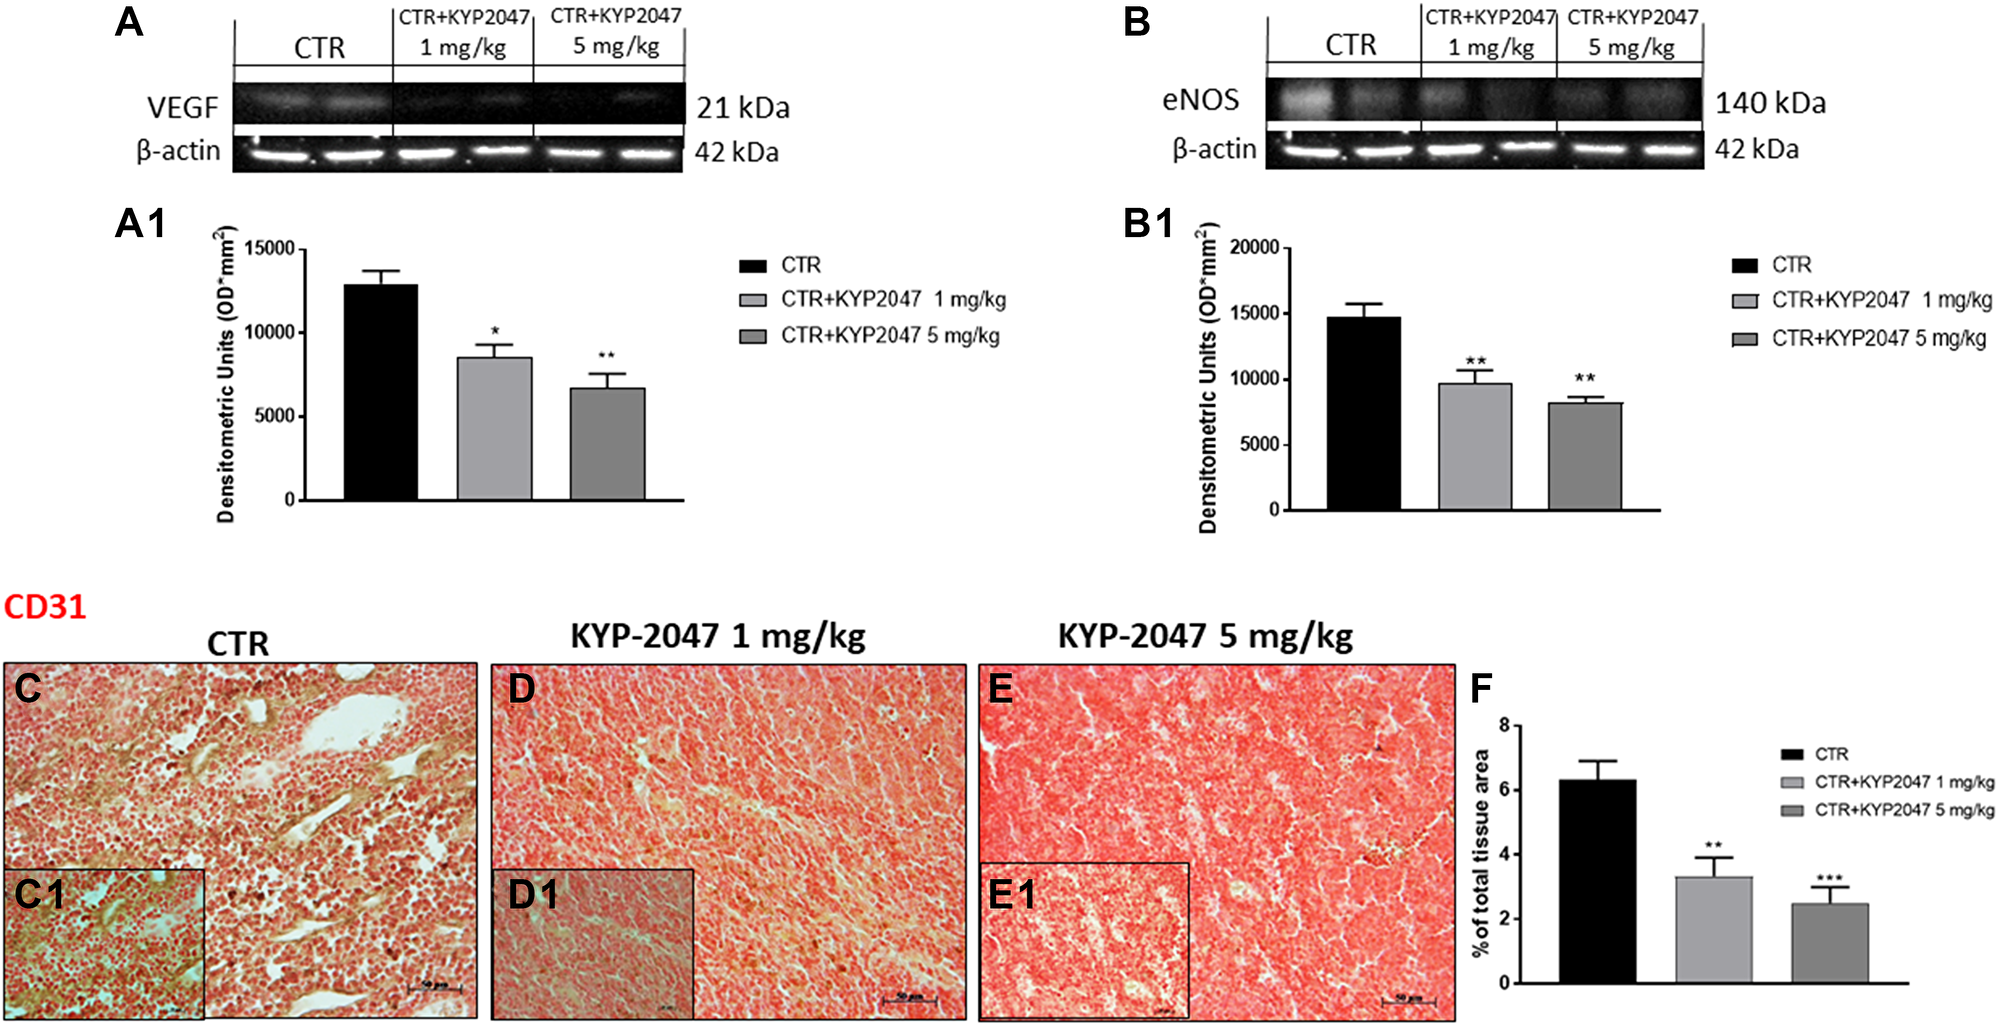 Effect of KYP-2047 on VEGF, eNOS and CD31 expression.